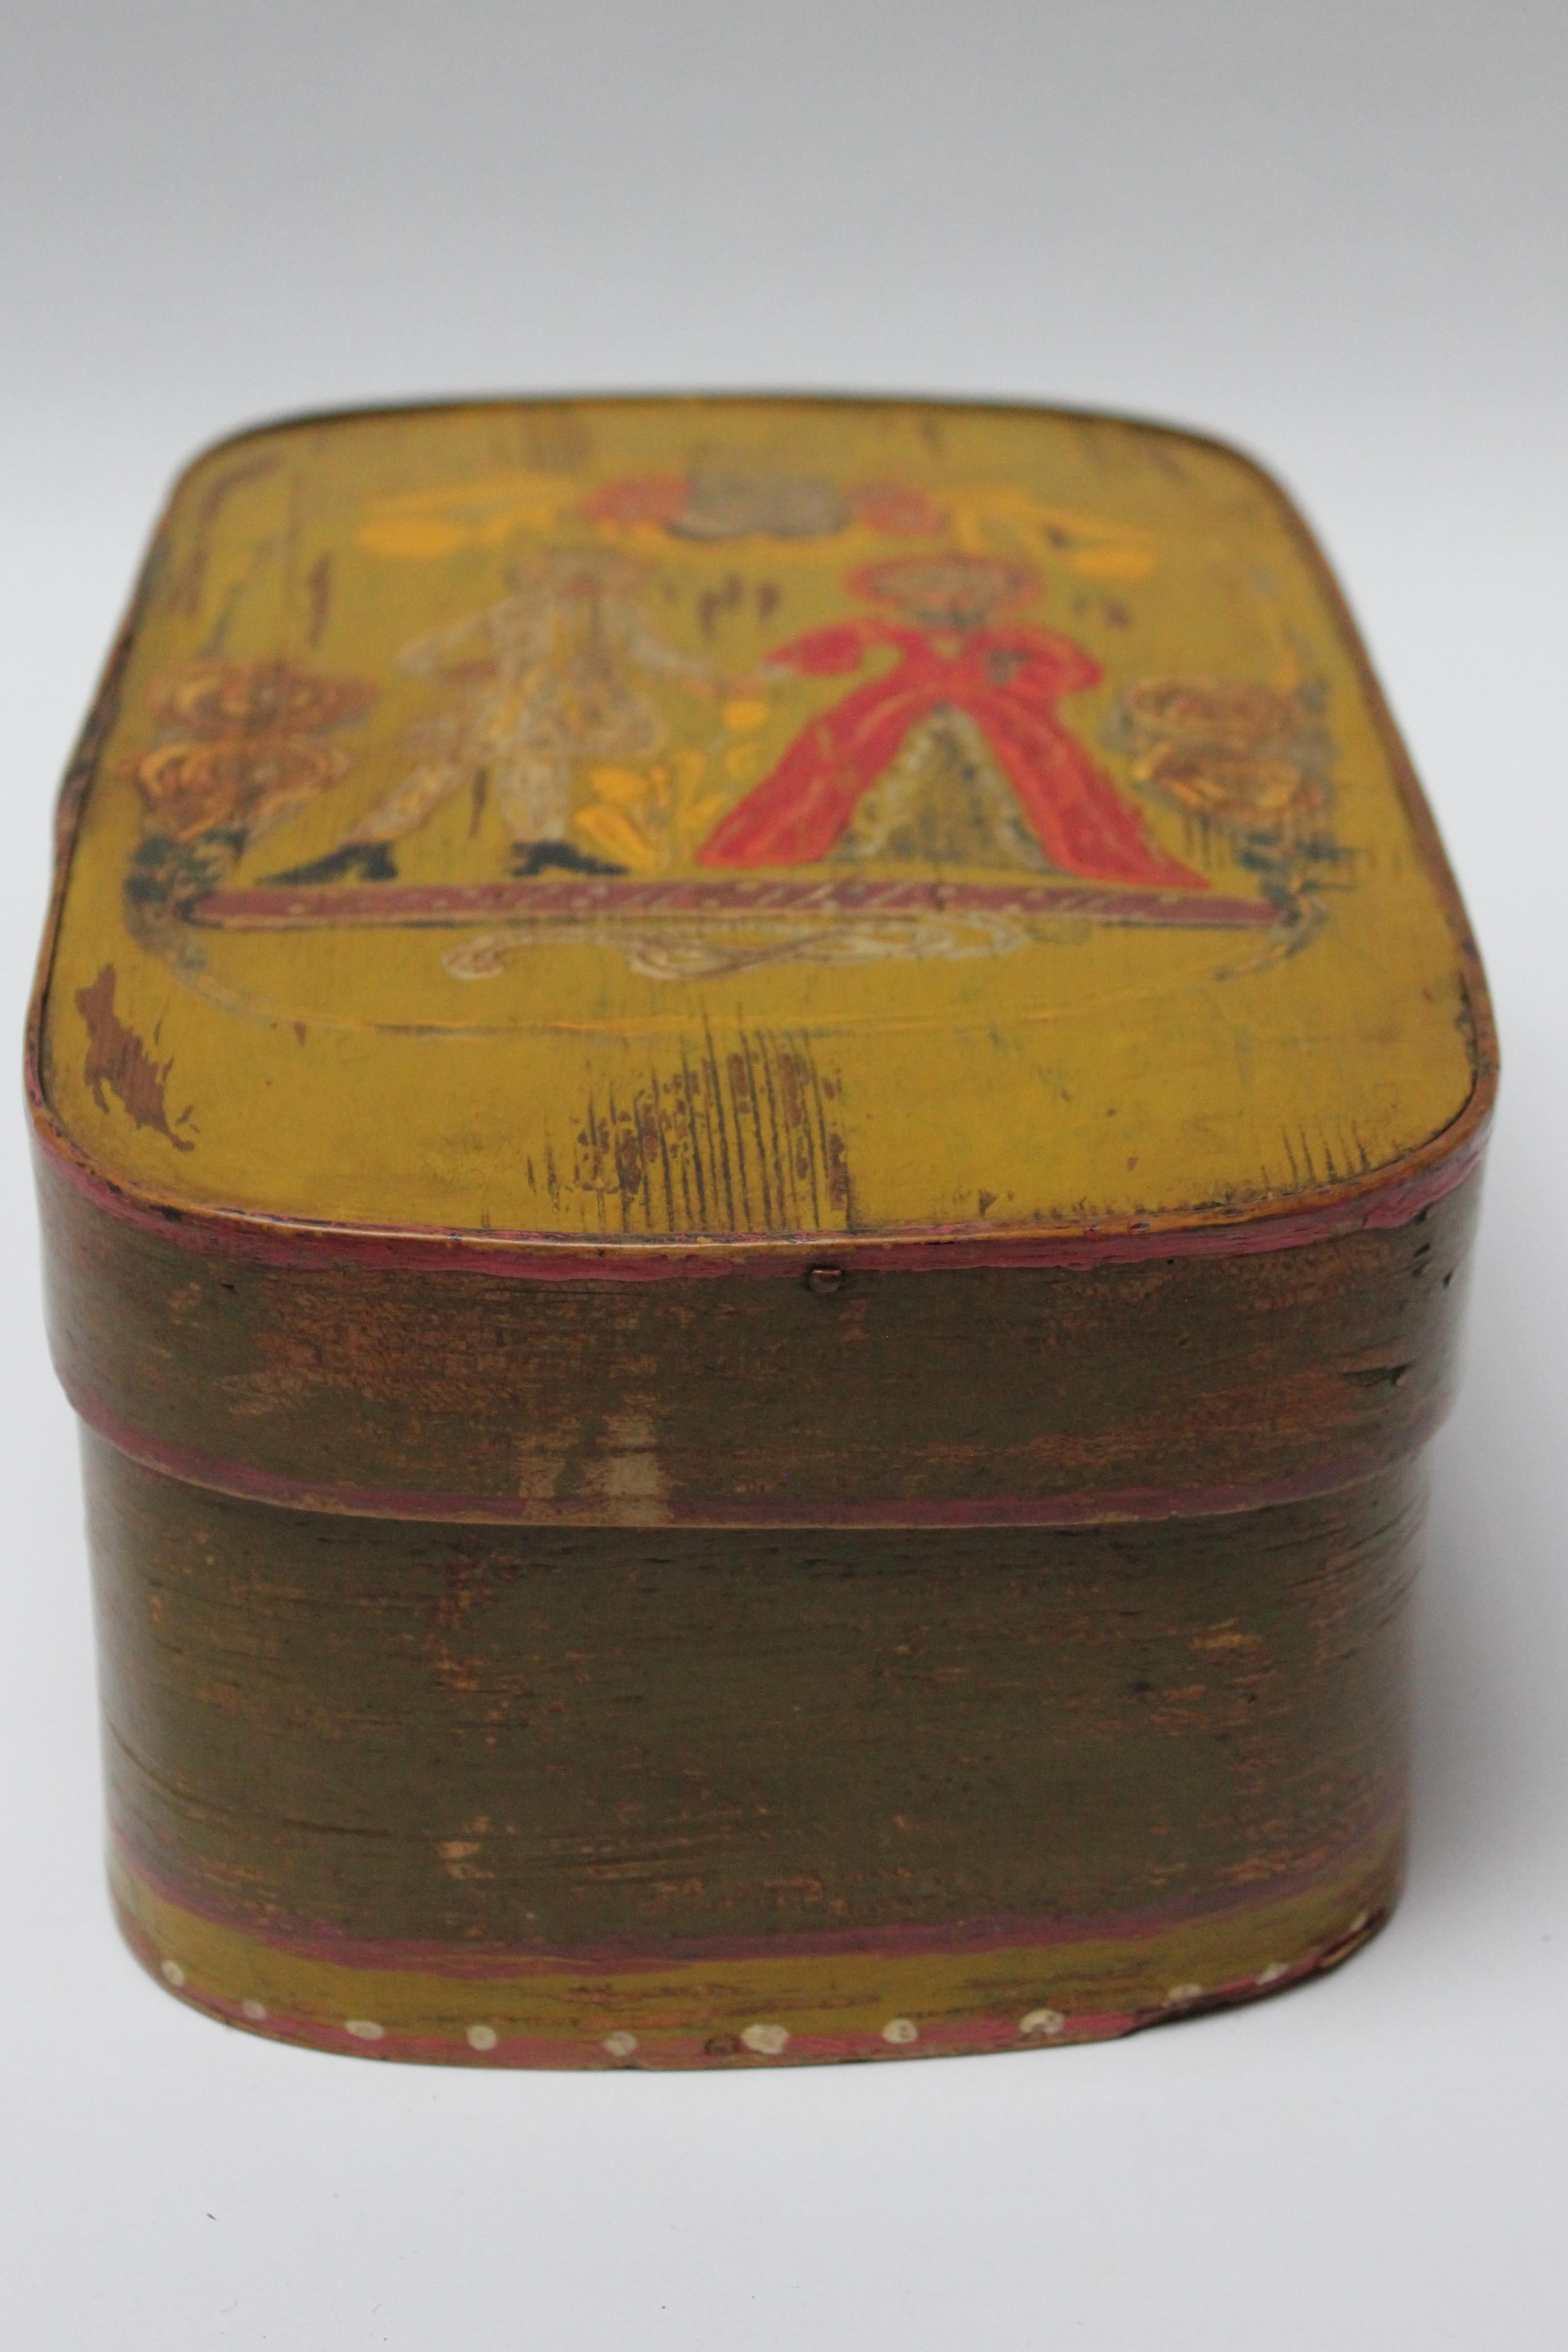 Ca. late 19th century French oak storage box with hand-painted 'clown' decoration to the top and a floral motif to the bottom component. Attractive color combinations - base coat is ochre with red, yellow, and coral, green, black and pink details.